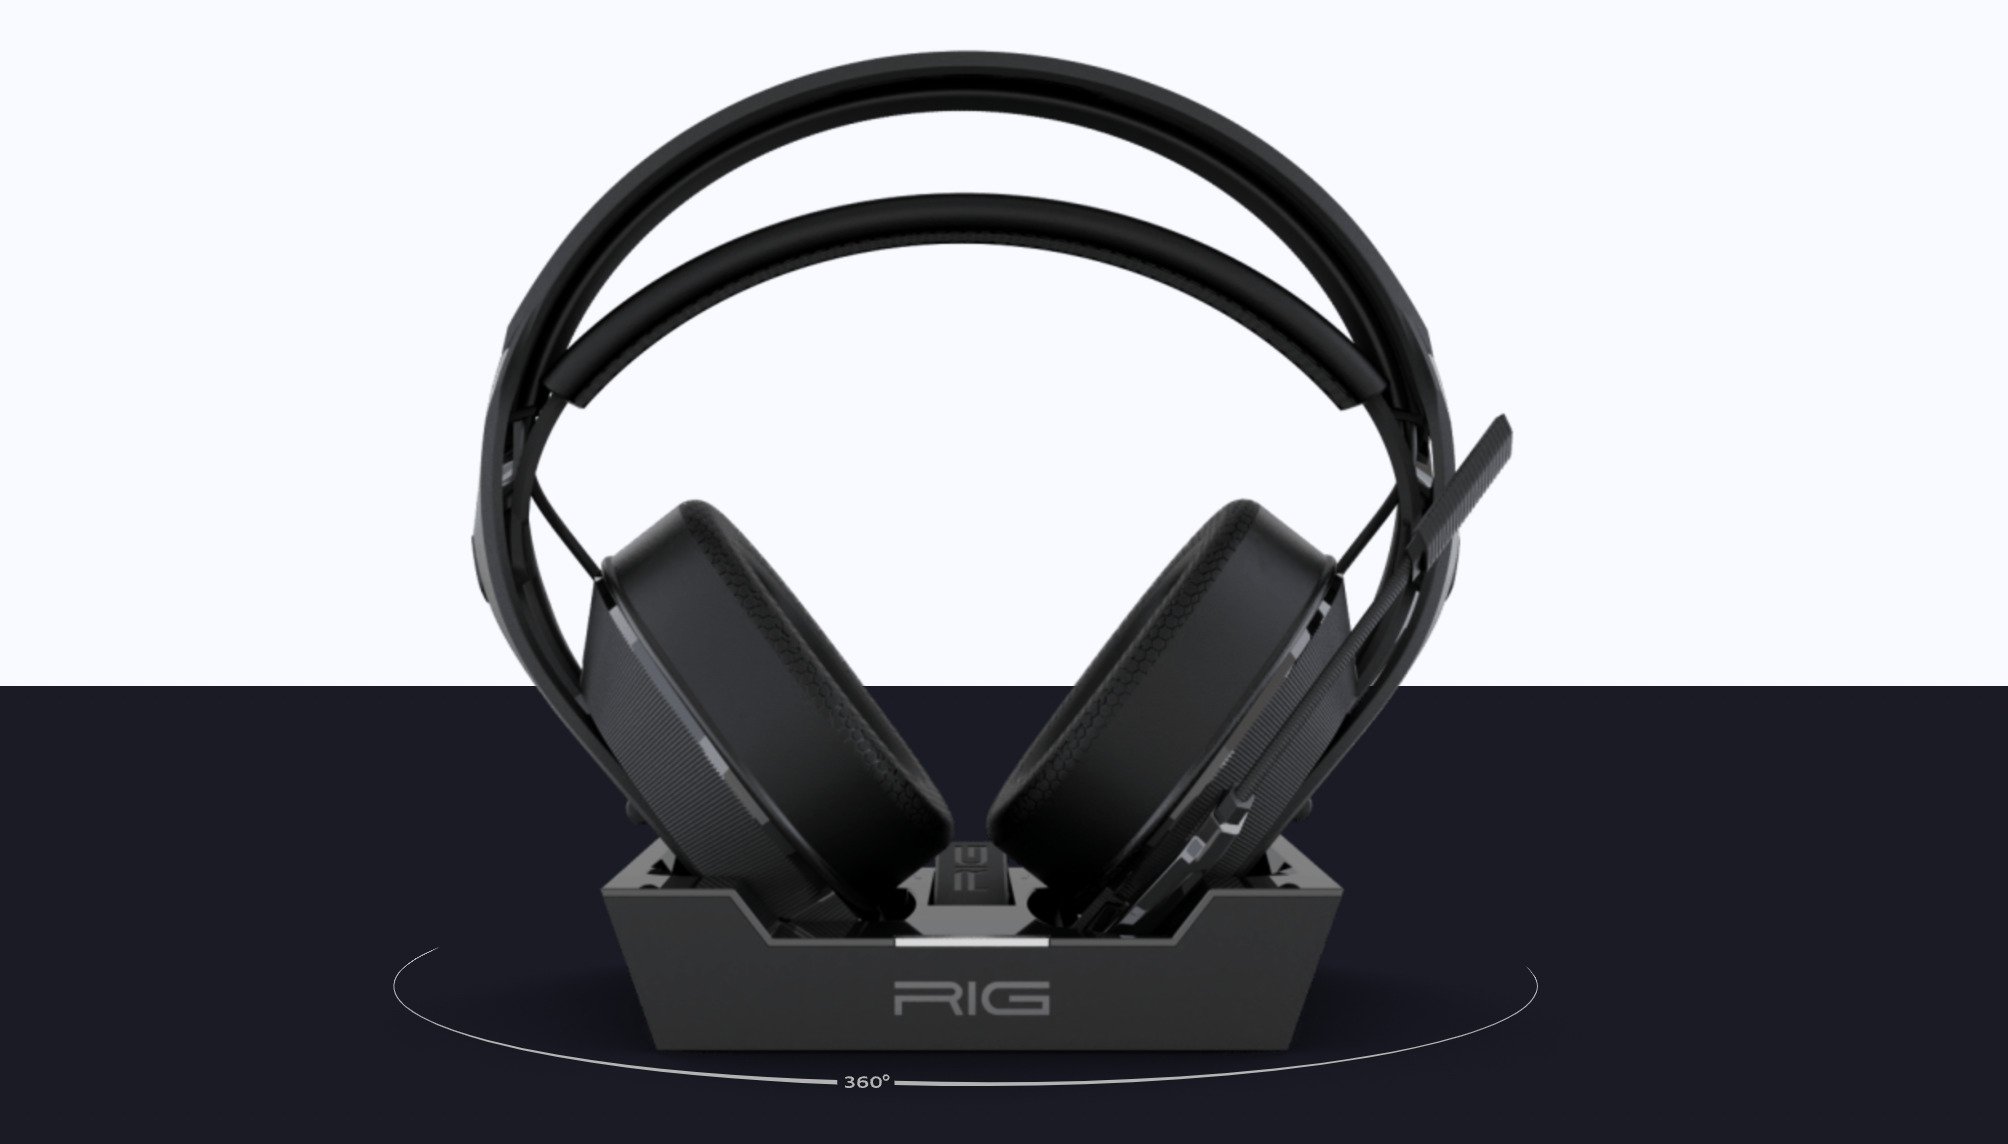 RIG Gaming Headset Round-Up [Hardware] – 800 Pro HS, 500 Pro Gen 2, and 300 Pro